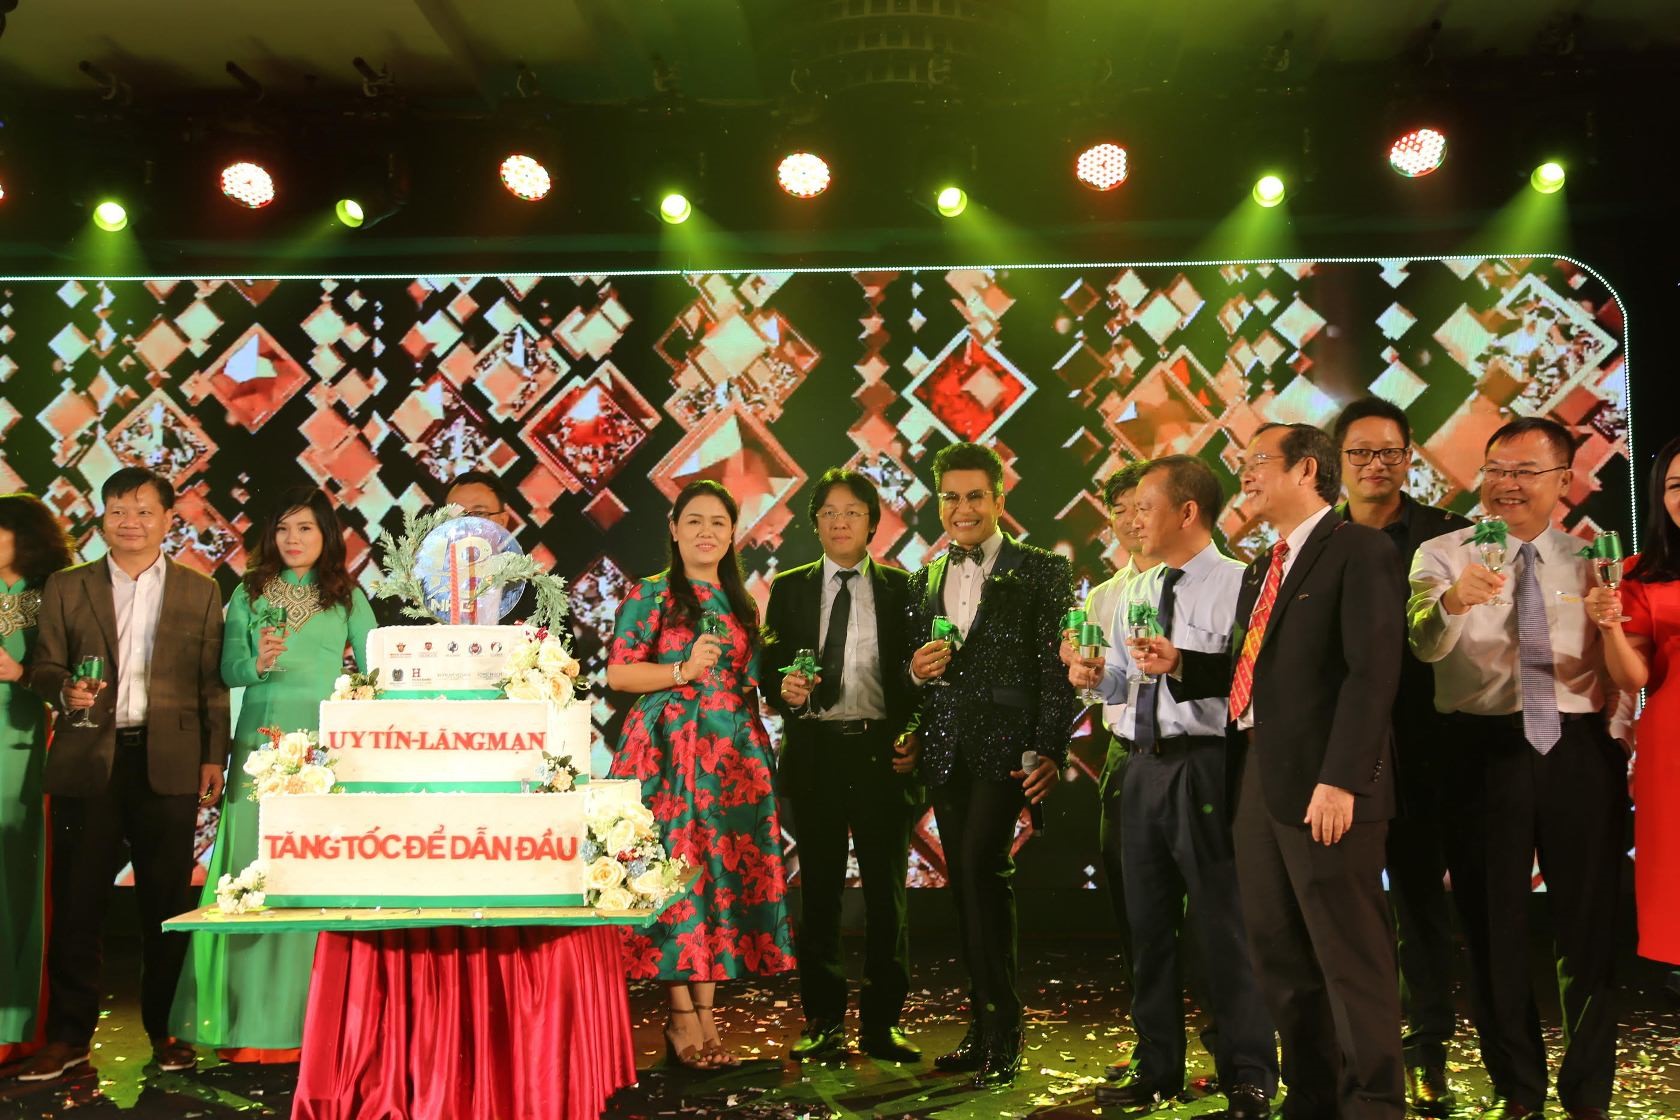 Birthday cake cutting ceremony was attended by Mr. Hoang Quoc Viet - Chairman, Mr. Tran Dai Hai - Vice Chairman and Ms. Hoang Nguyen Thu Thao - Vice Chairman and CEO - together with the Board of Management, leaders of Member units.